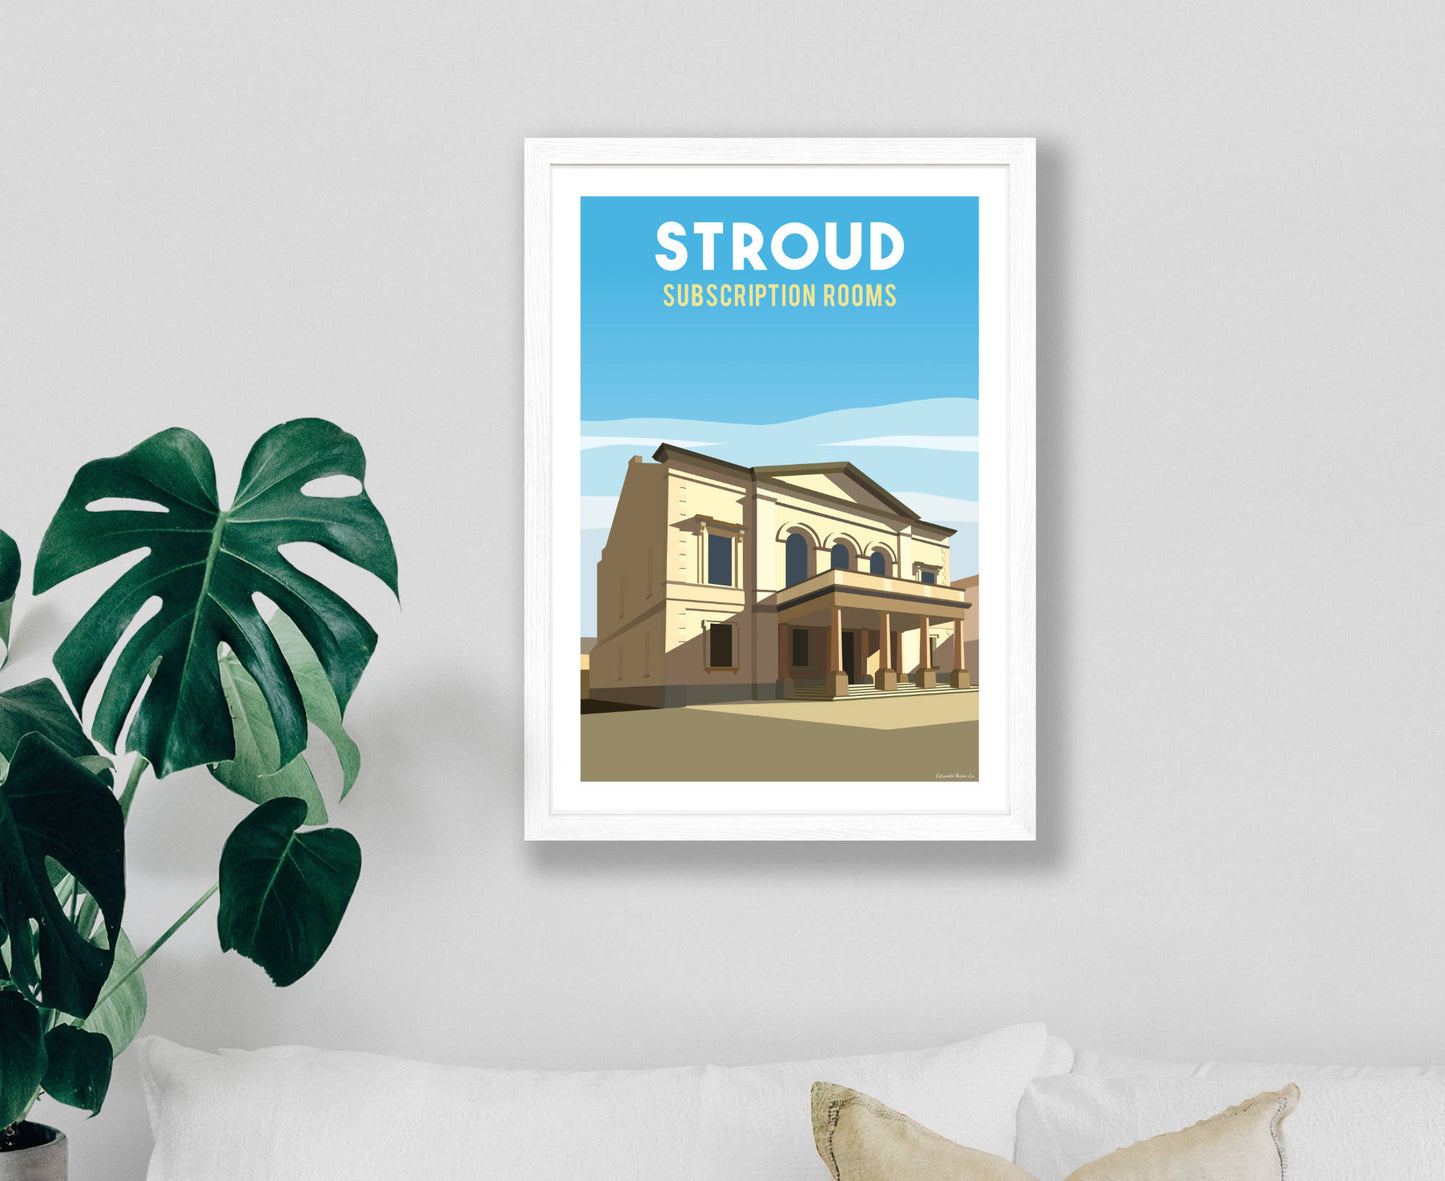 Stroud Subscription Rooms Poster in white frame